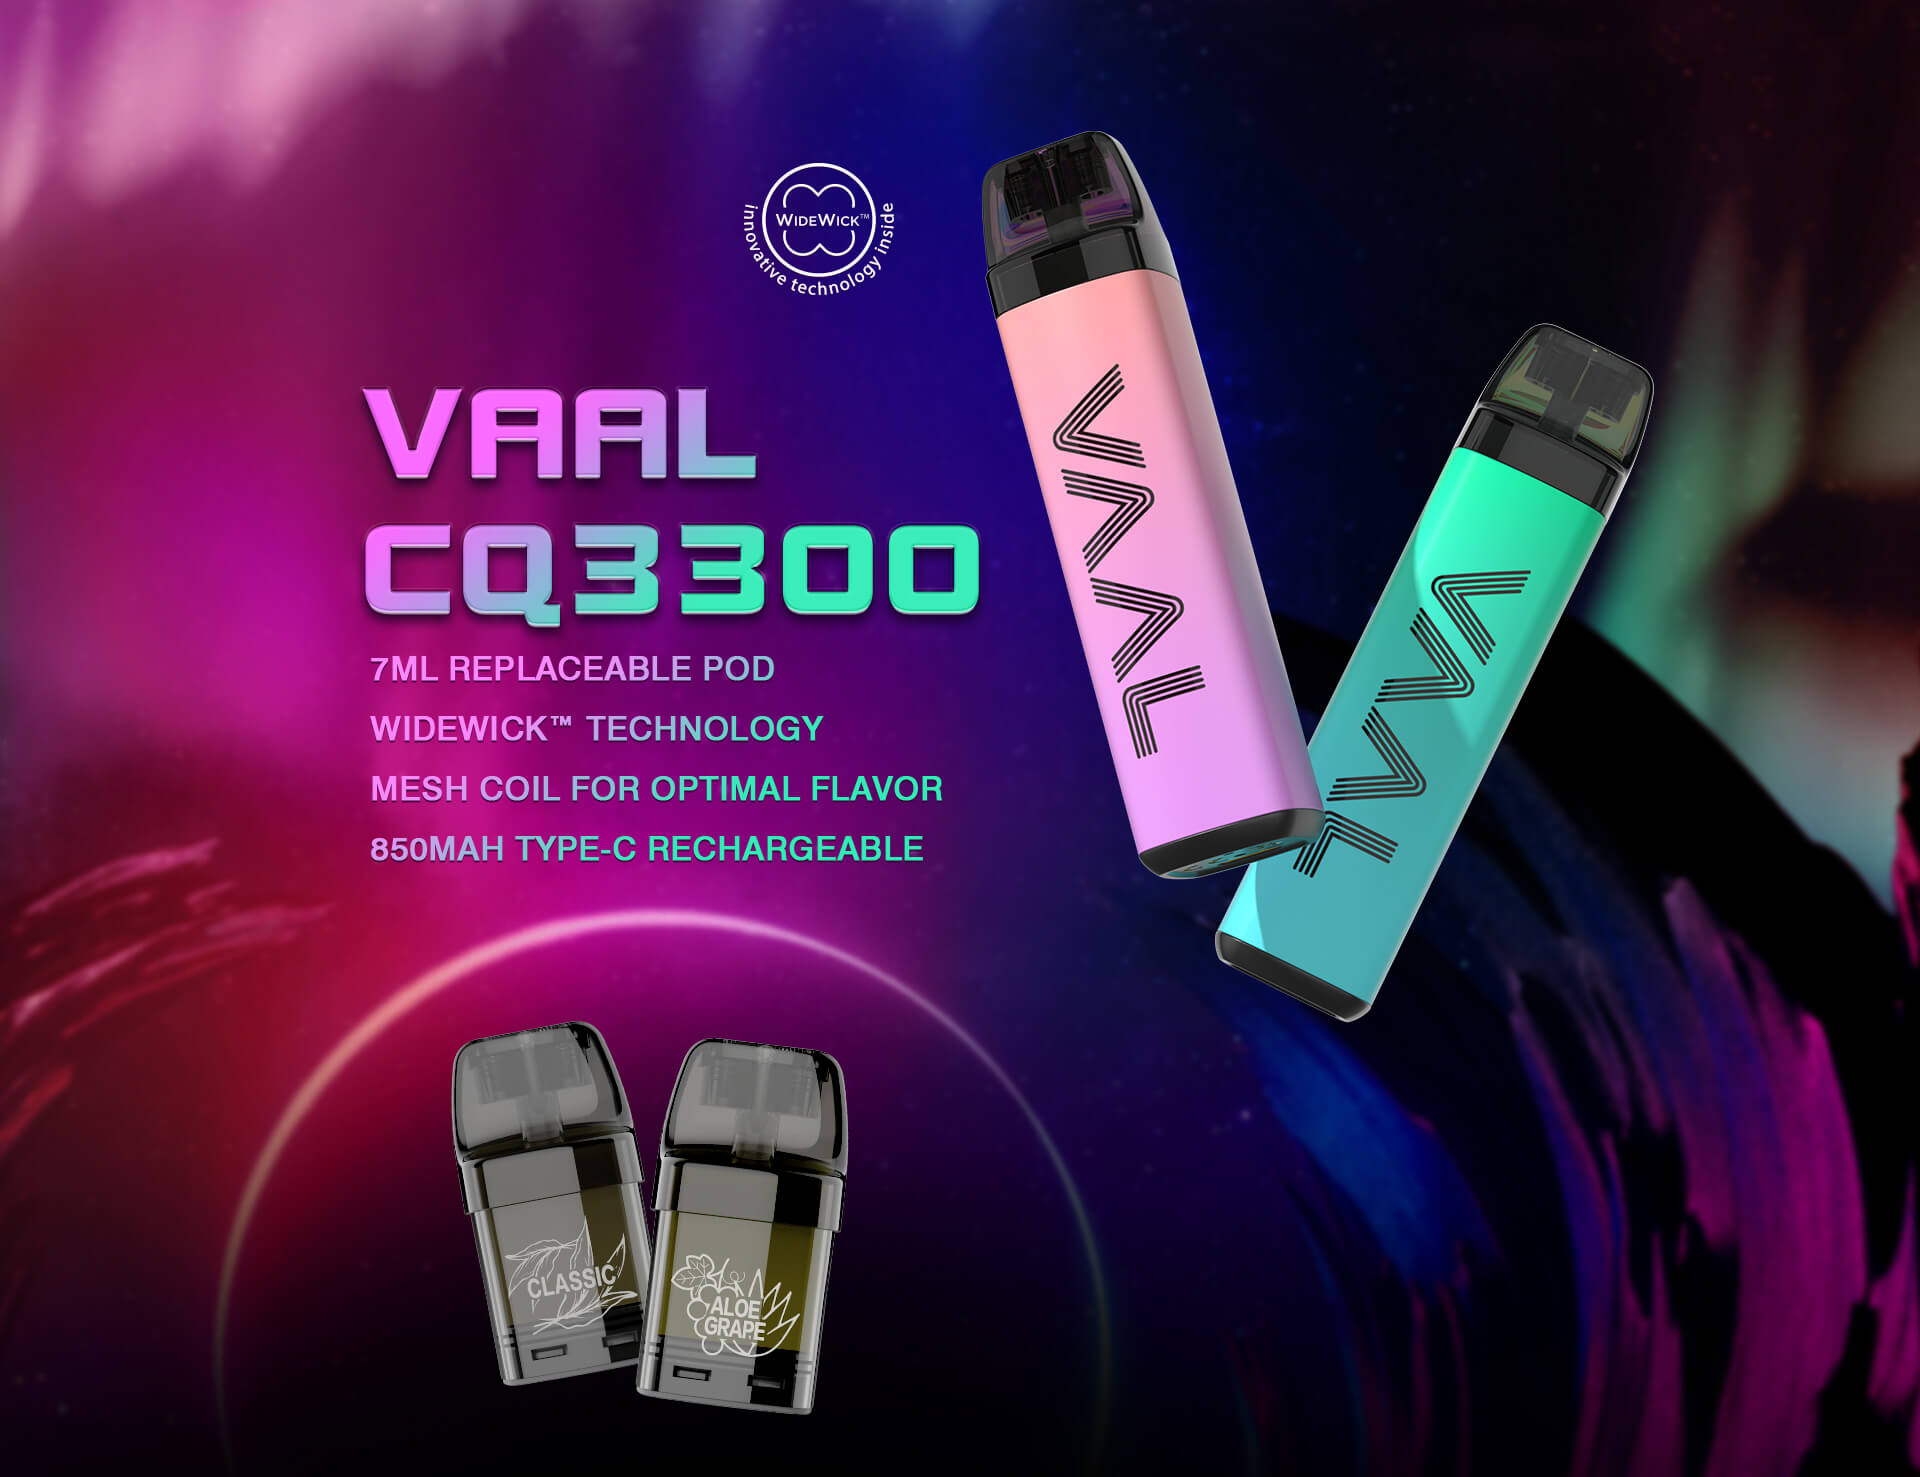 Along with the replaceable pod, Vaal CQ3300 will offer users a variety of options and you can easily choose your most enjoyable flavored pod.